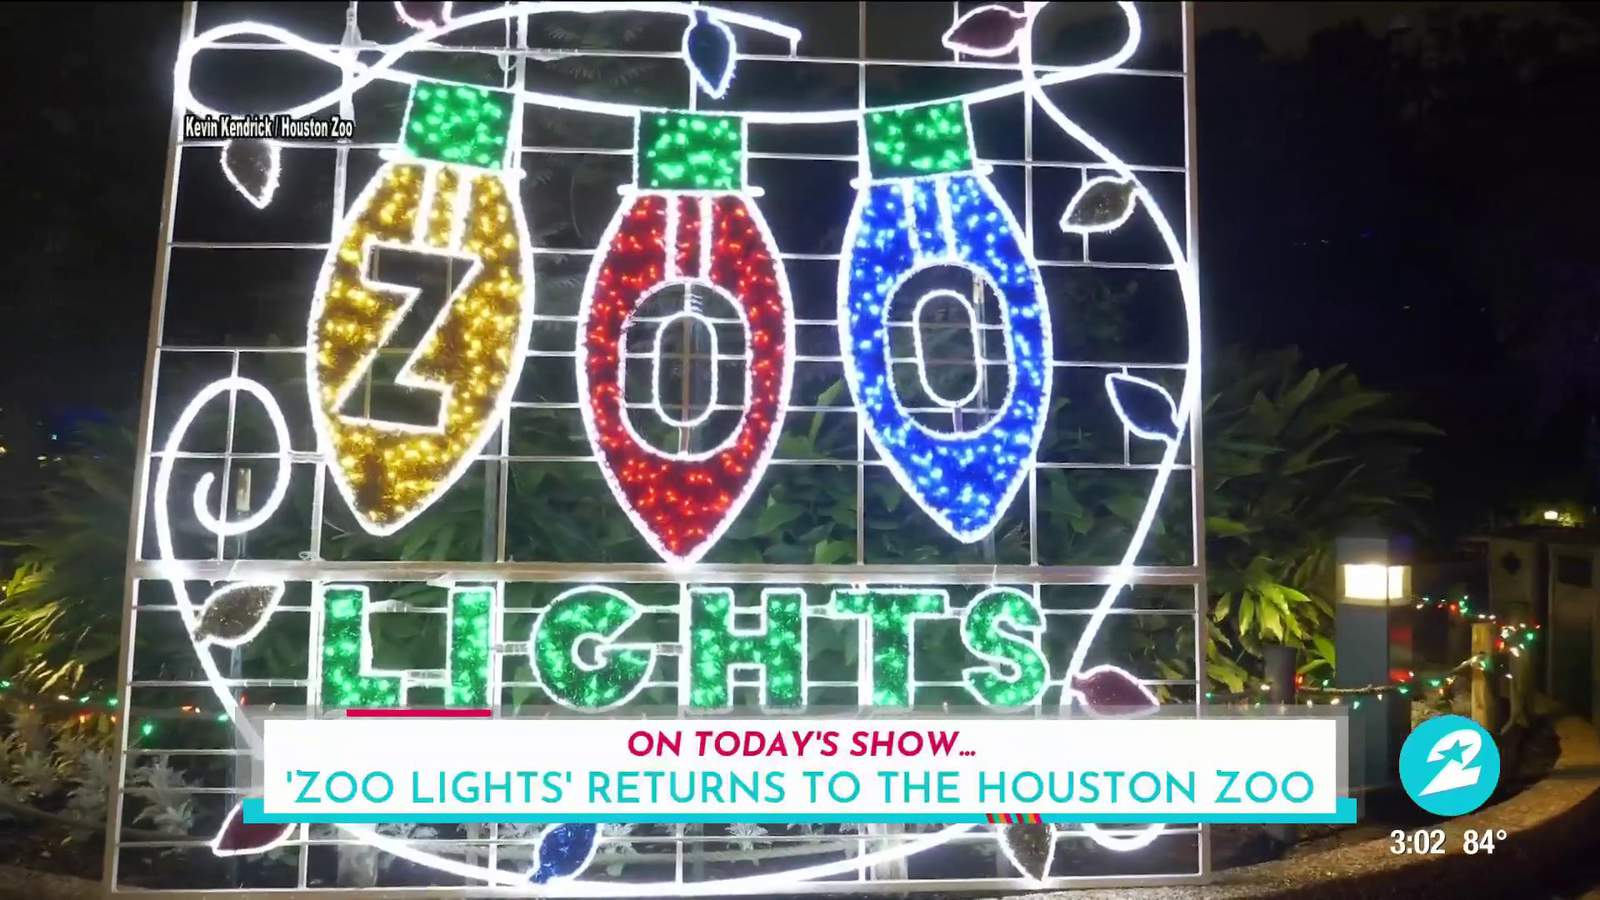 ‘Zoo Lights’ ready to transform the Houston Zoo into a magical winter spectacular